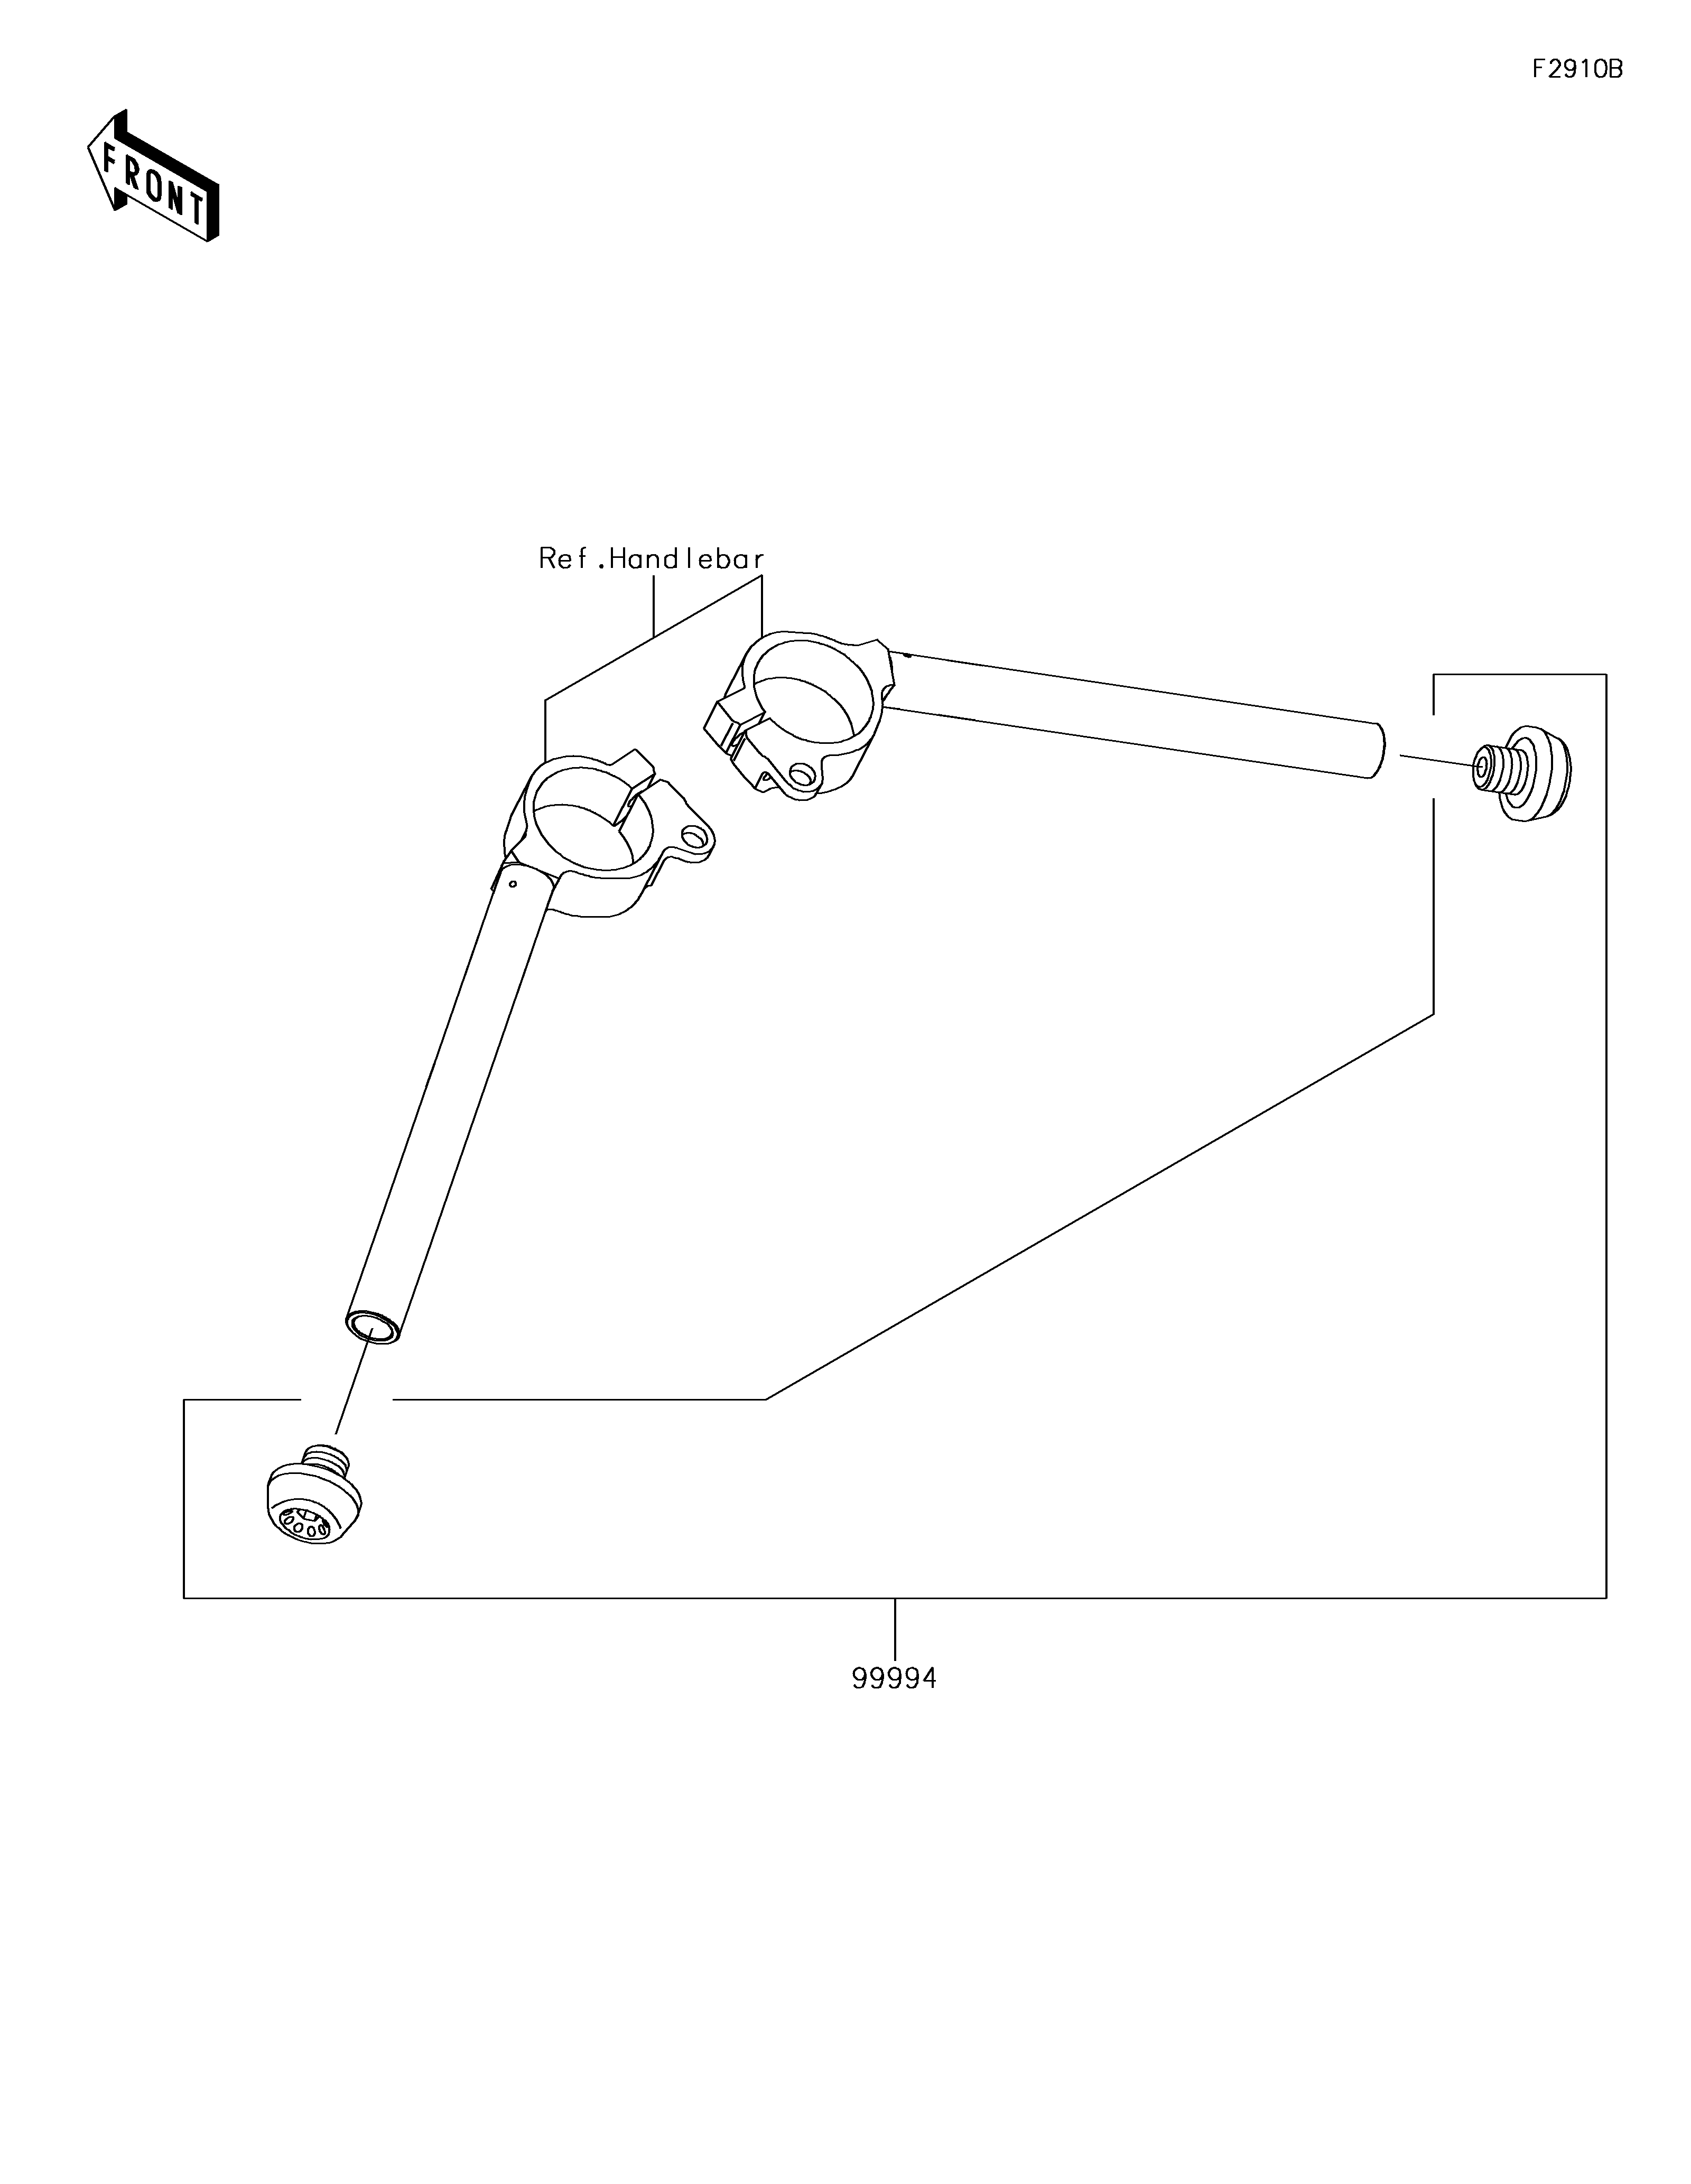 Accessory(Handle Weight)